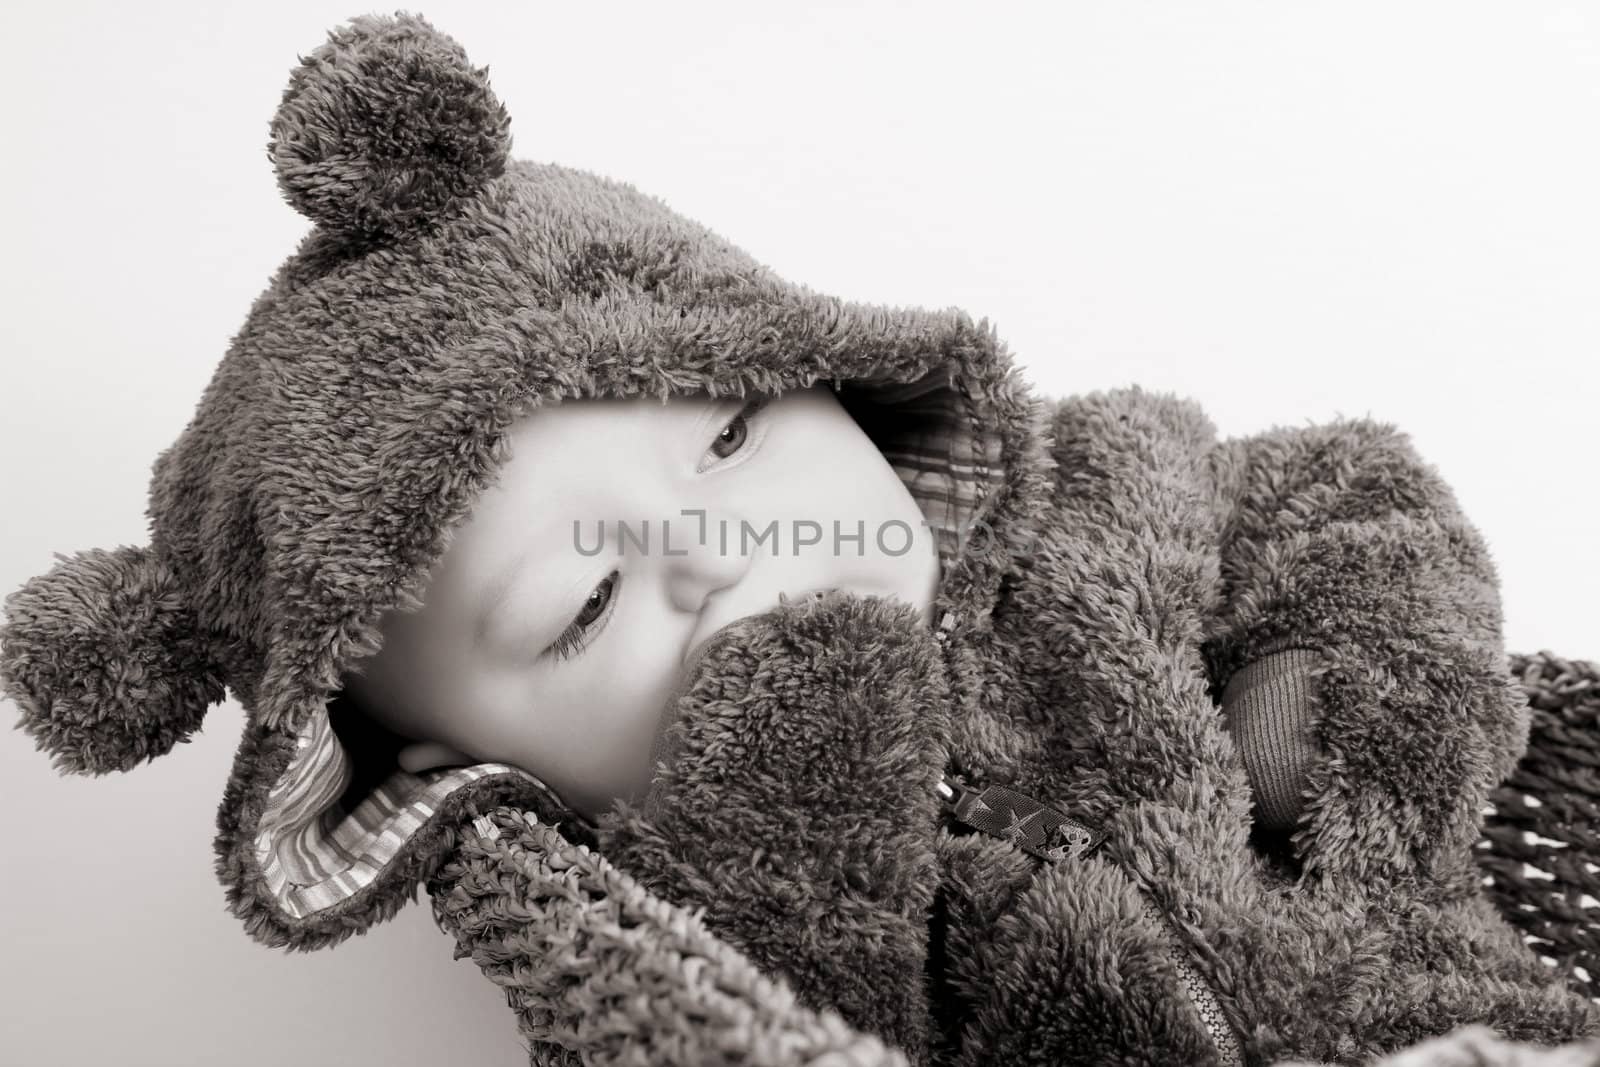 Four month old baby boy wearing a fully bear suit